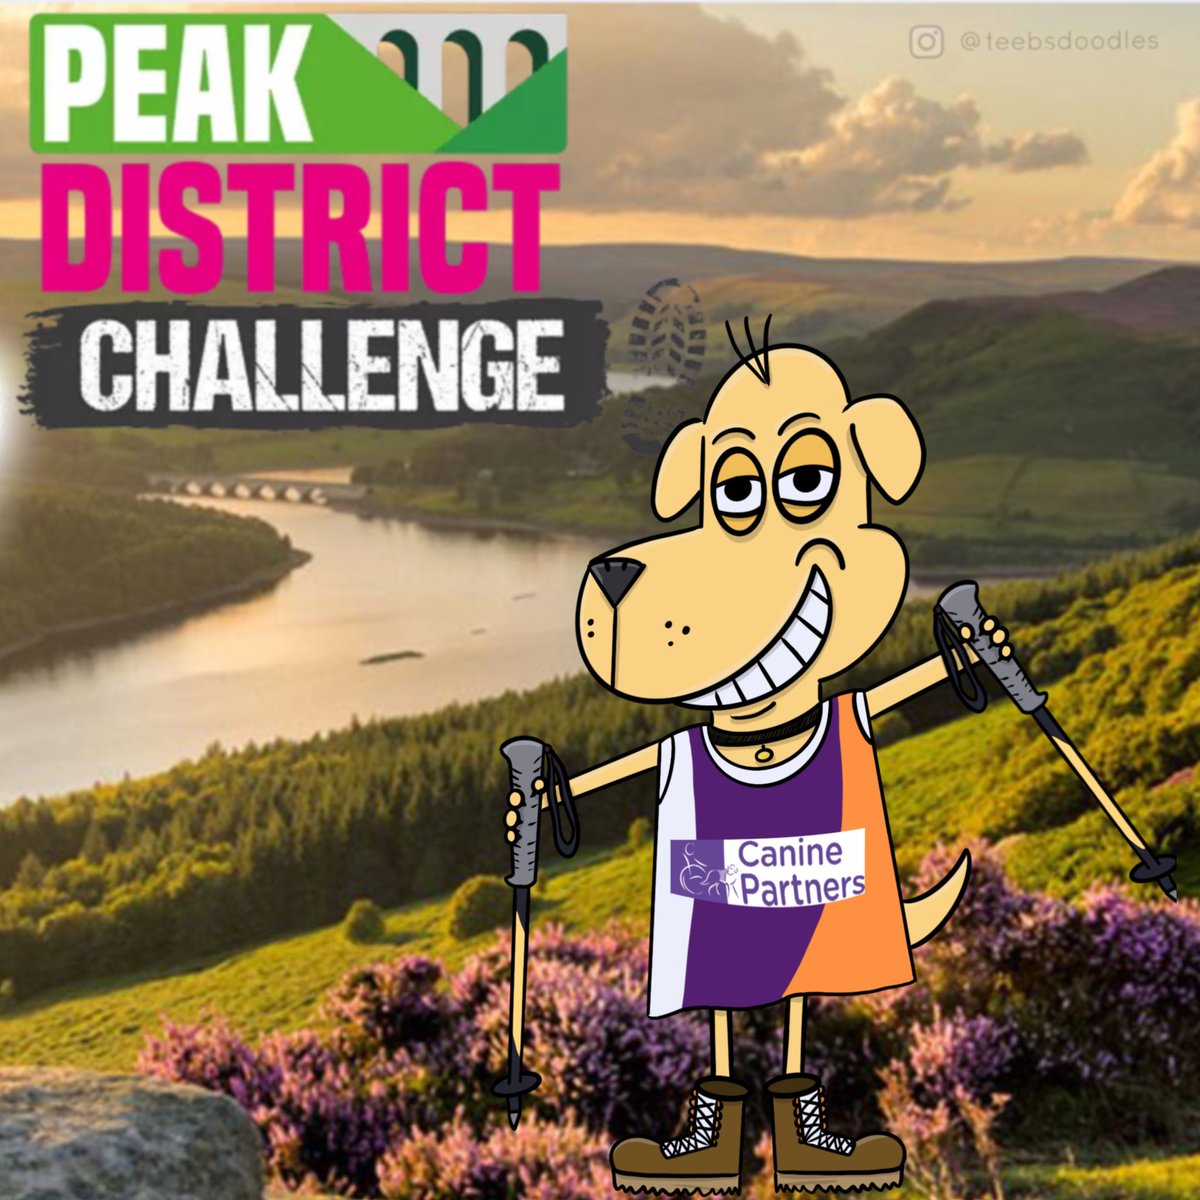 🐕🥾Next weekend I will be attempting to complete the Peak District Challenge (walking 100km over two days) in memory of David Statham, who sadly lost his life earlier this year. 

We will be raising money for a @caninepartnersuk.